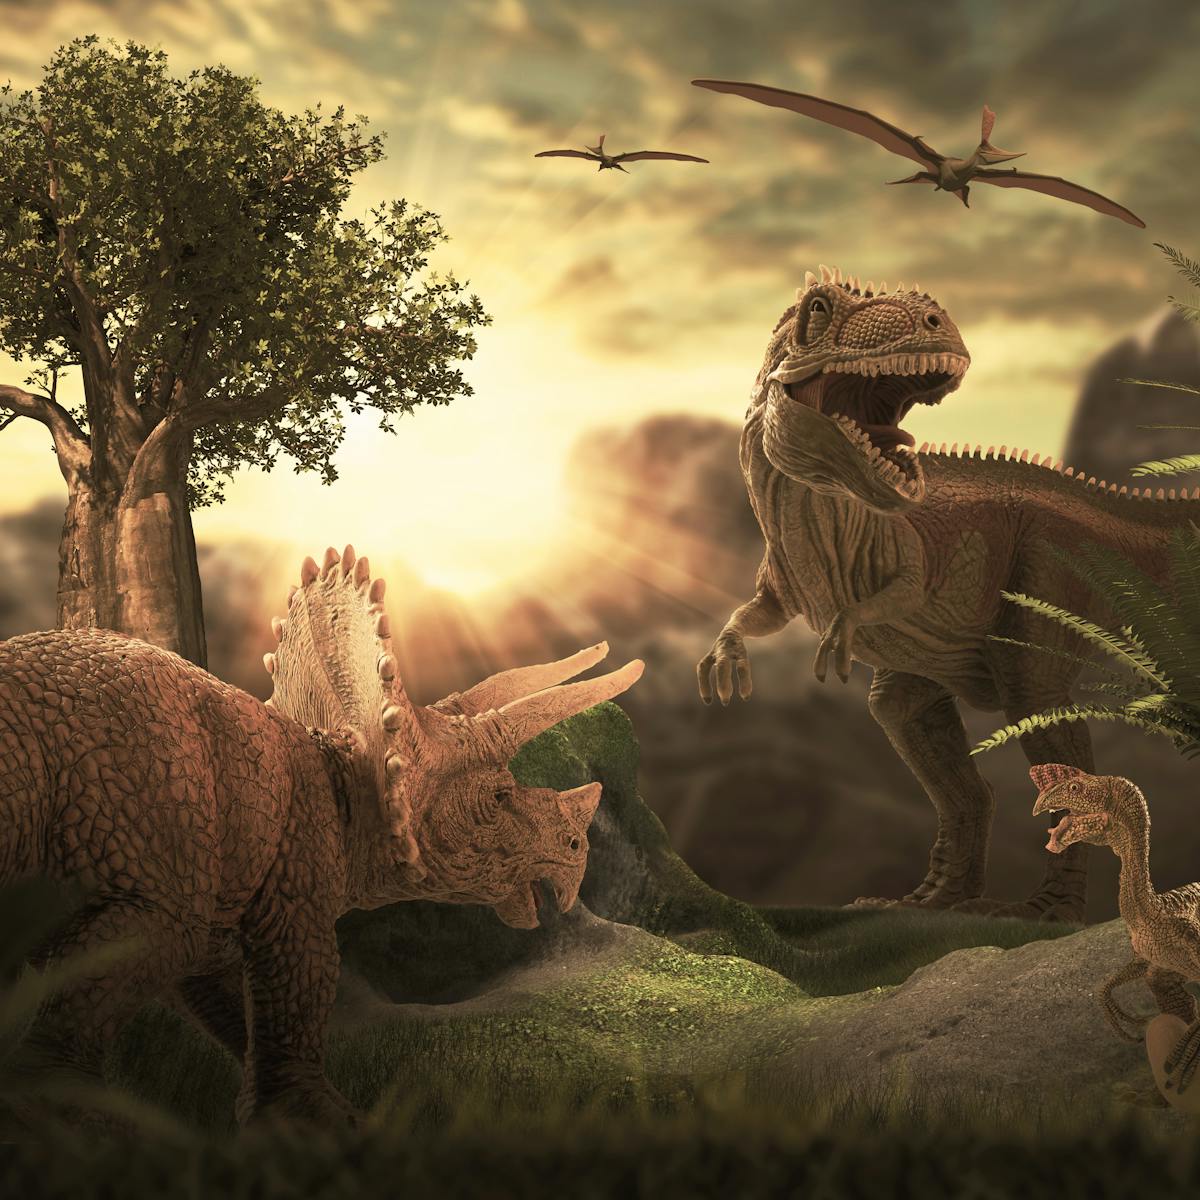 Dinosaurs were already in decline before the asteroid wiped them out – new  research